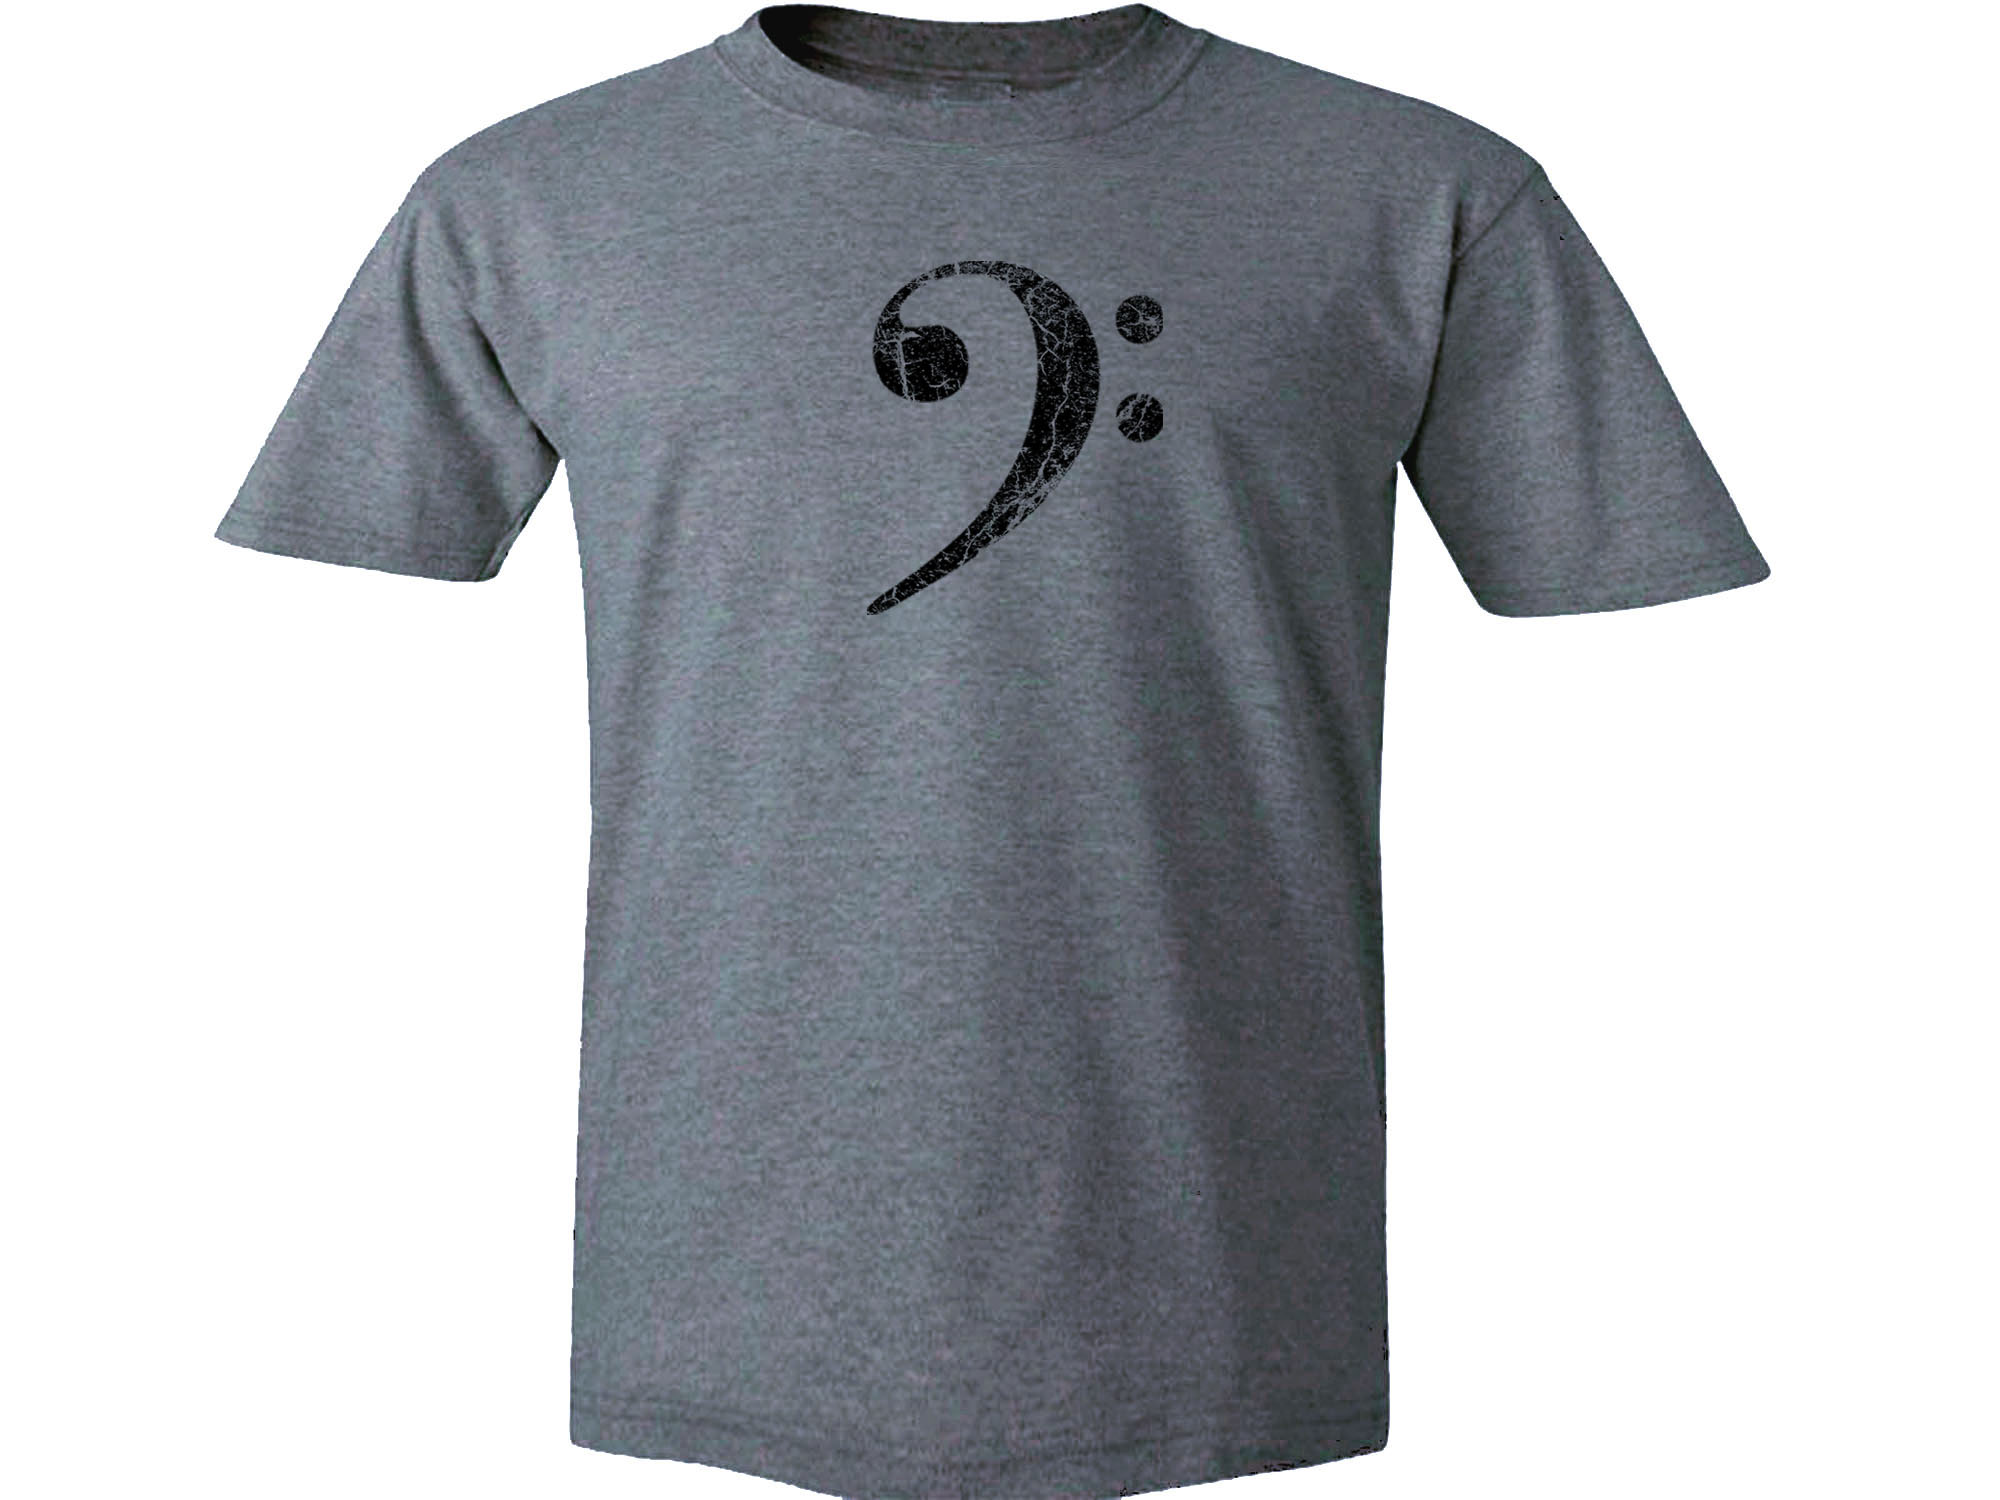 Bass player distressed clef t-shirt great gift for guitarist